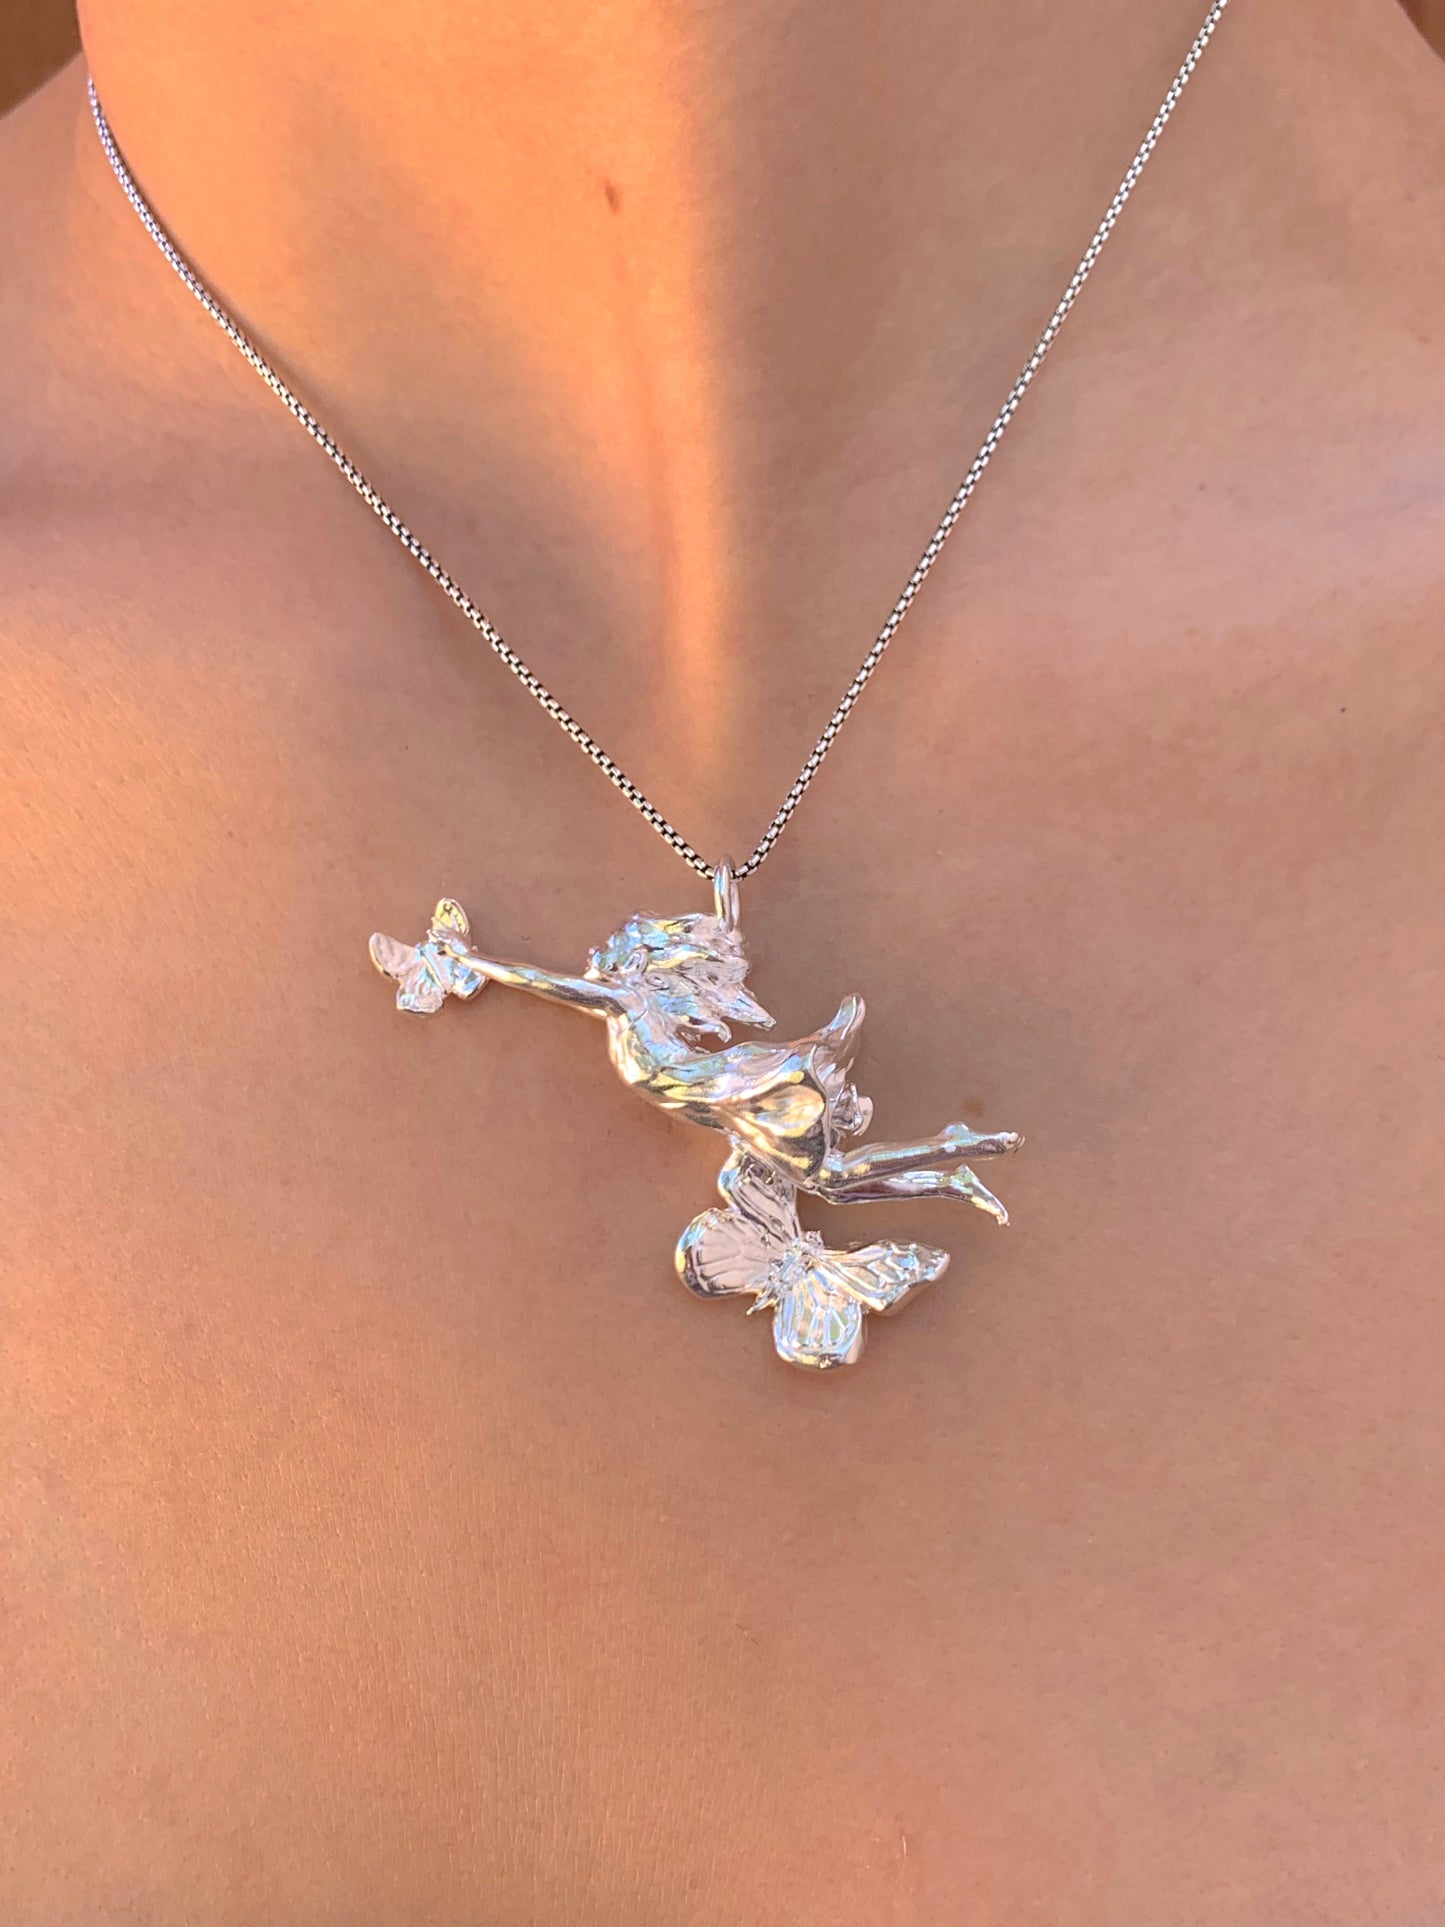 "Lift Her with Butterflies" Pendant Necklace - Sterling Silver